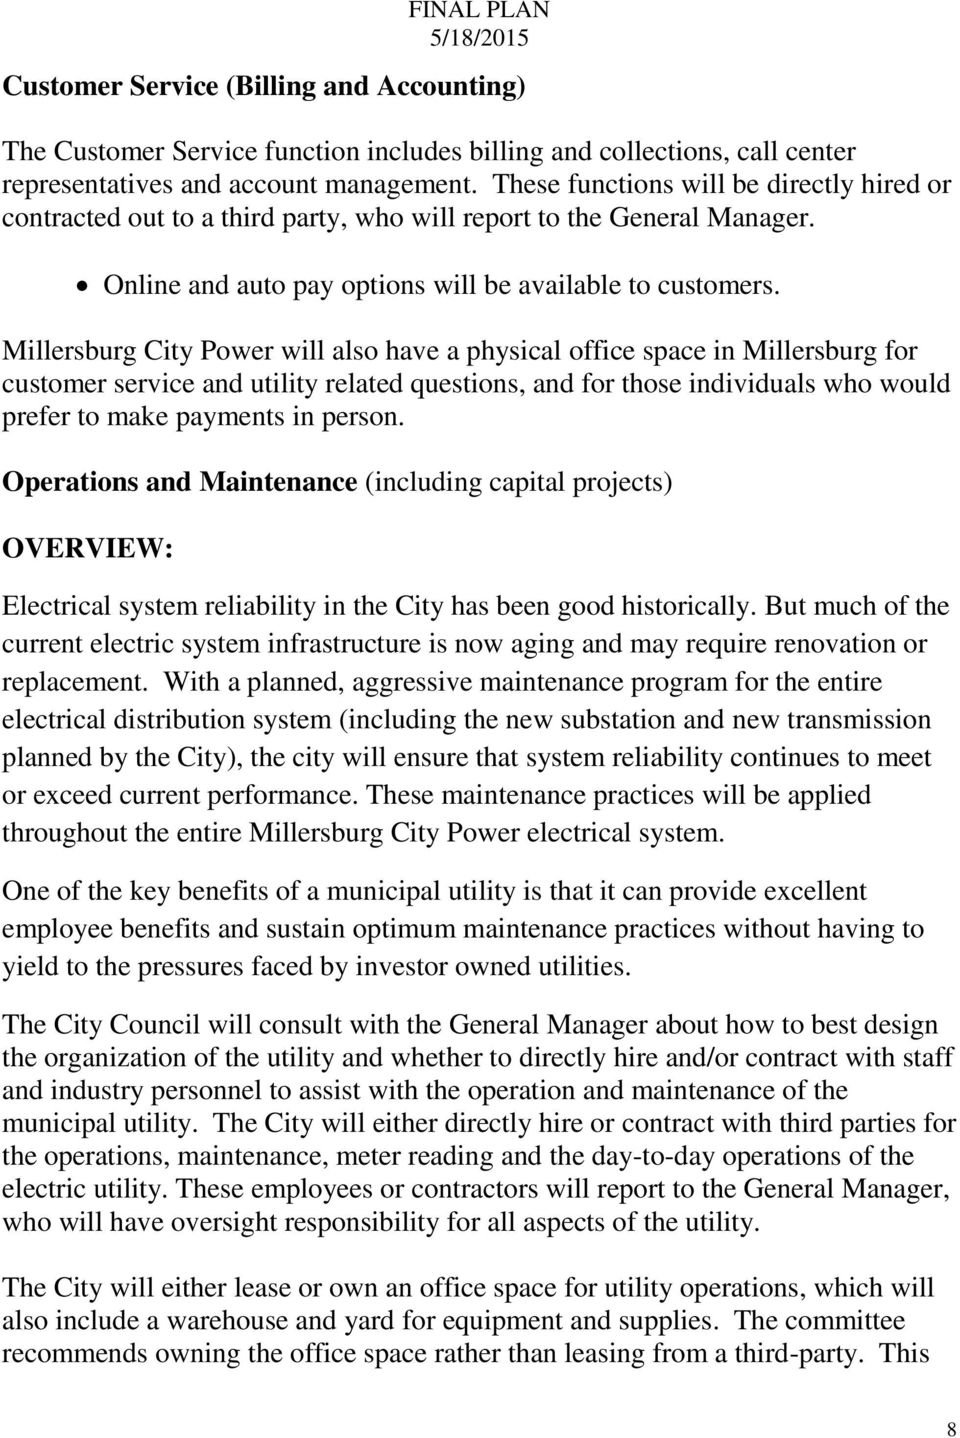 Millersburg City Power will also have a physical office space in Millersburg for customer service and utility related questions, and for those individuals who would prefer to make payments in person.